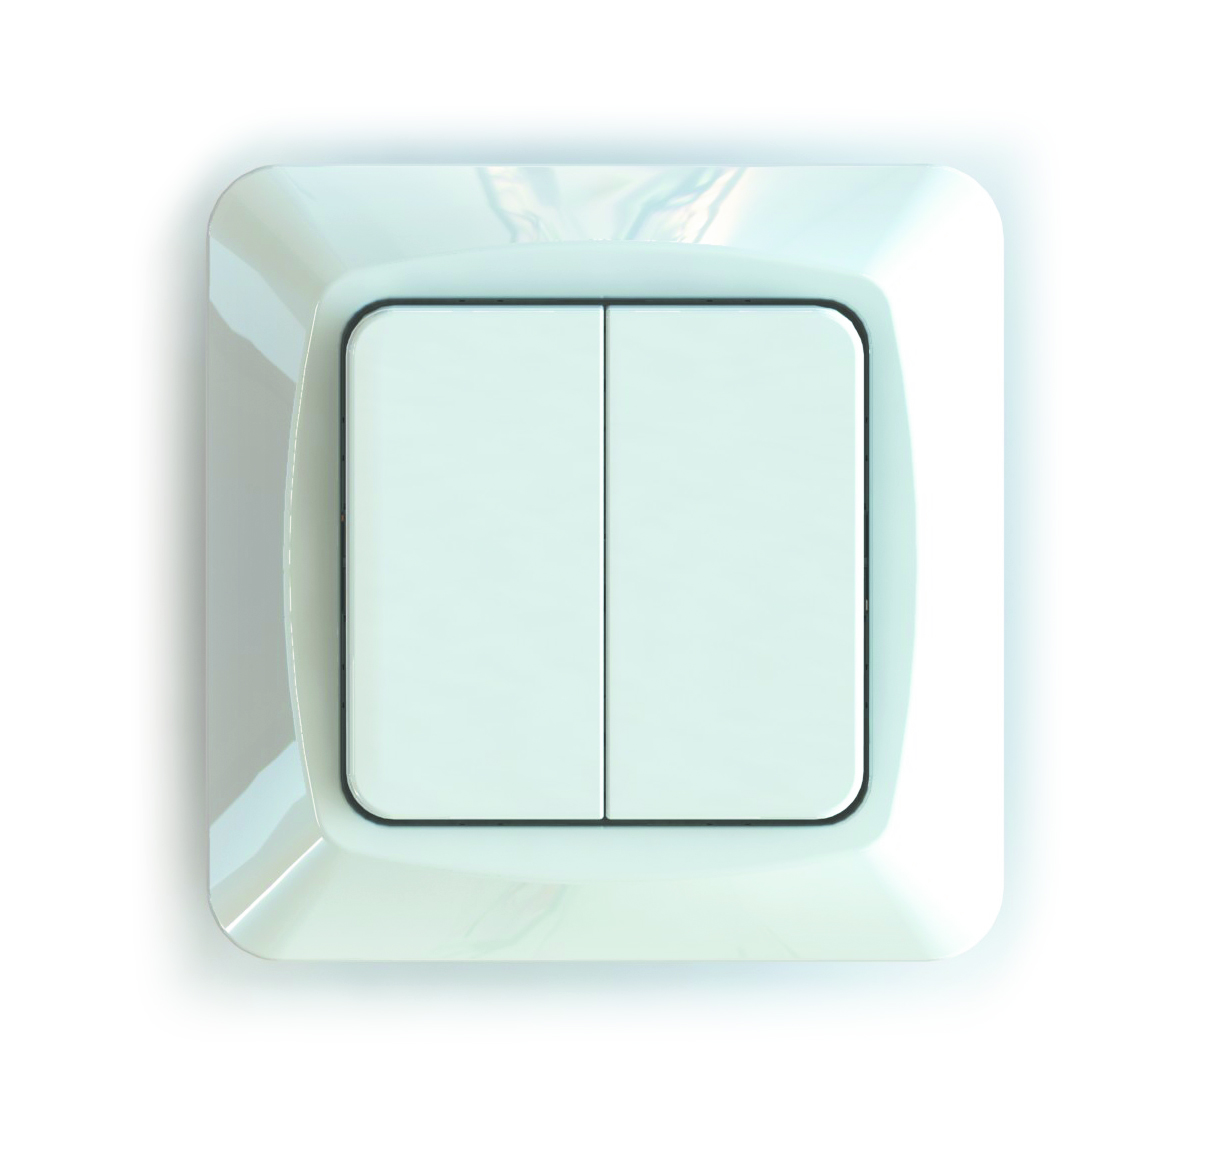 Flush-type wall rocker switches for fixed installation, screwless terminal ETM204PQ